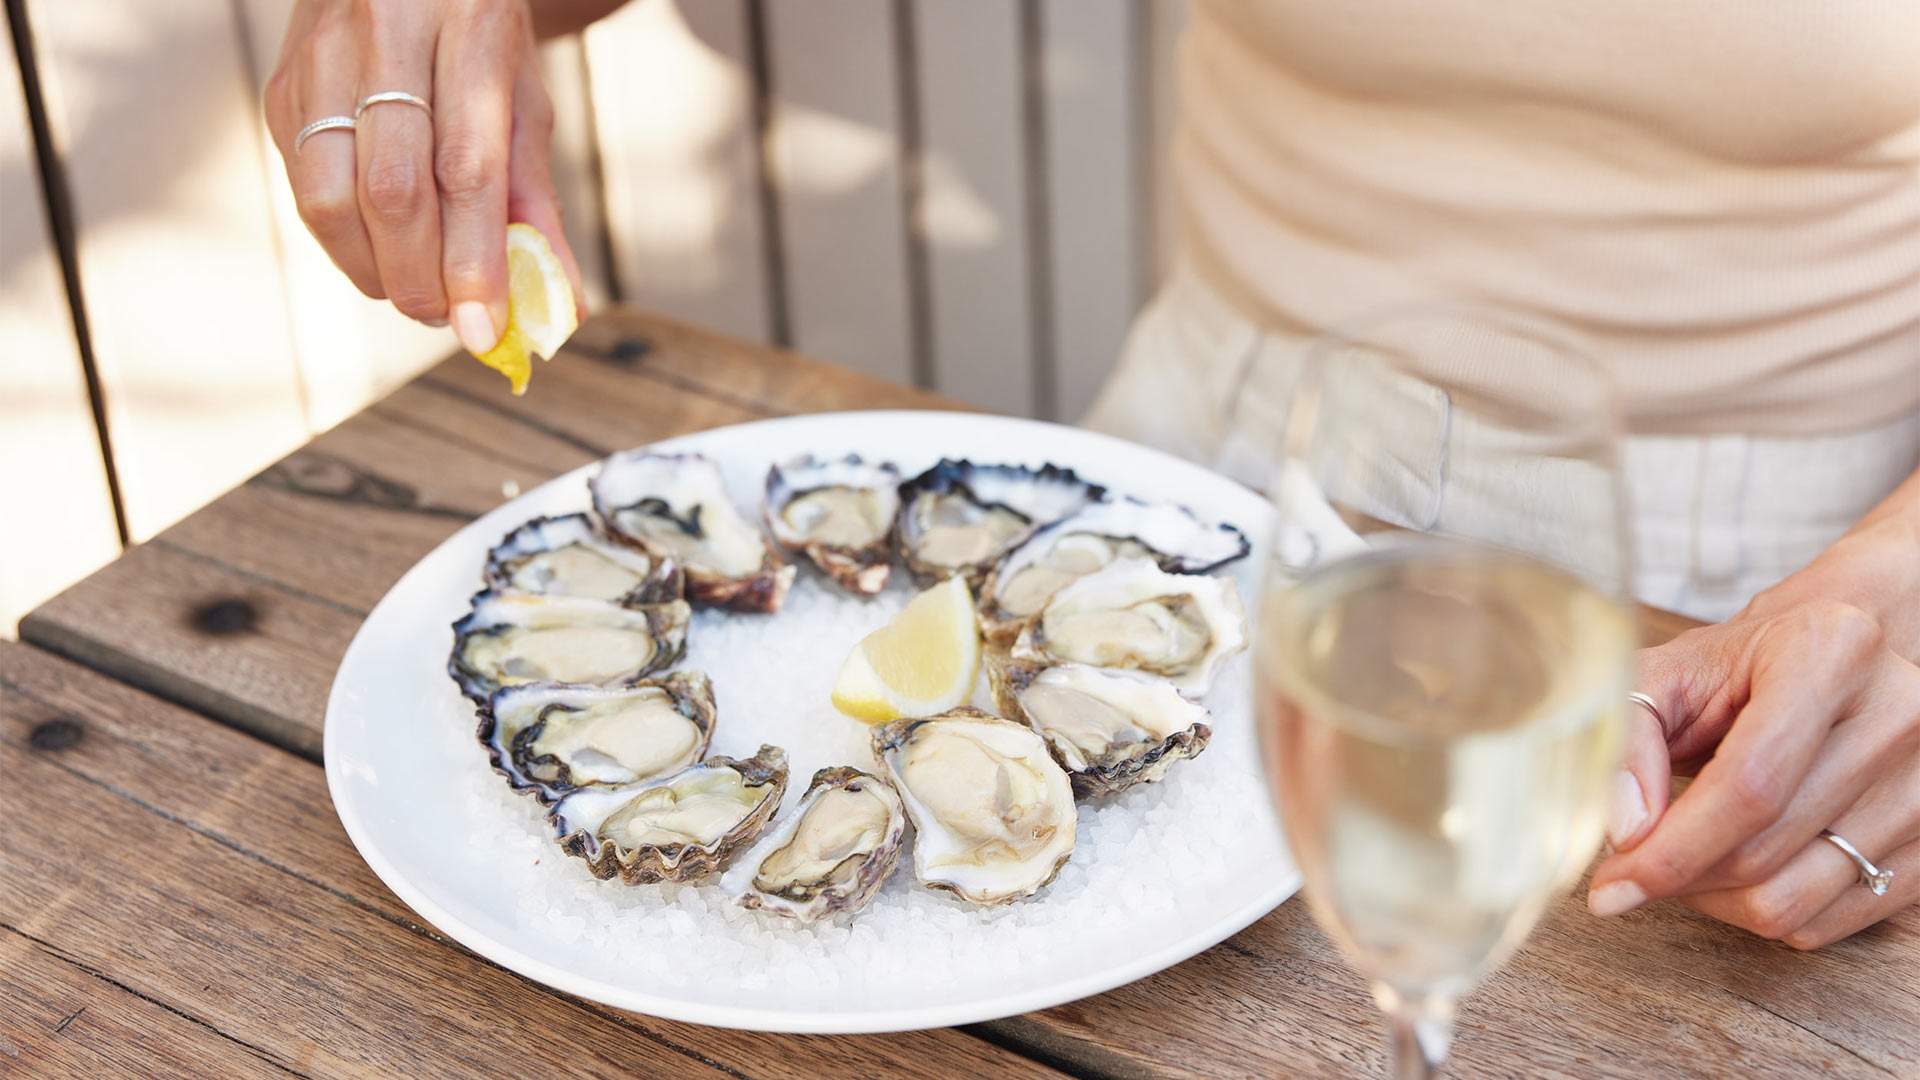 A patron squeezes a lemon onto a plate of a dozen oysters at The Erko.